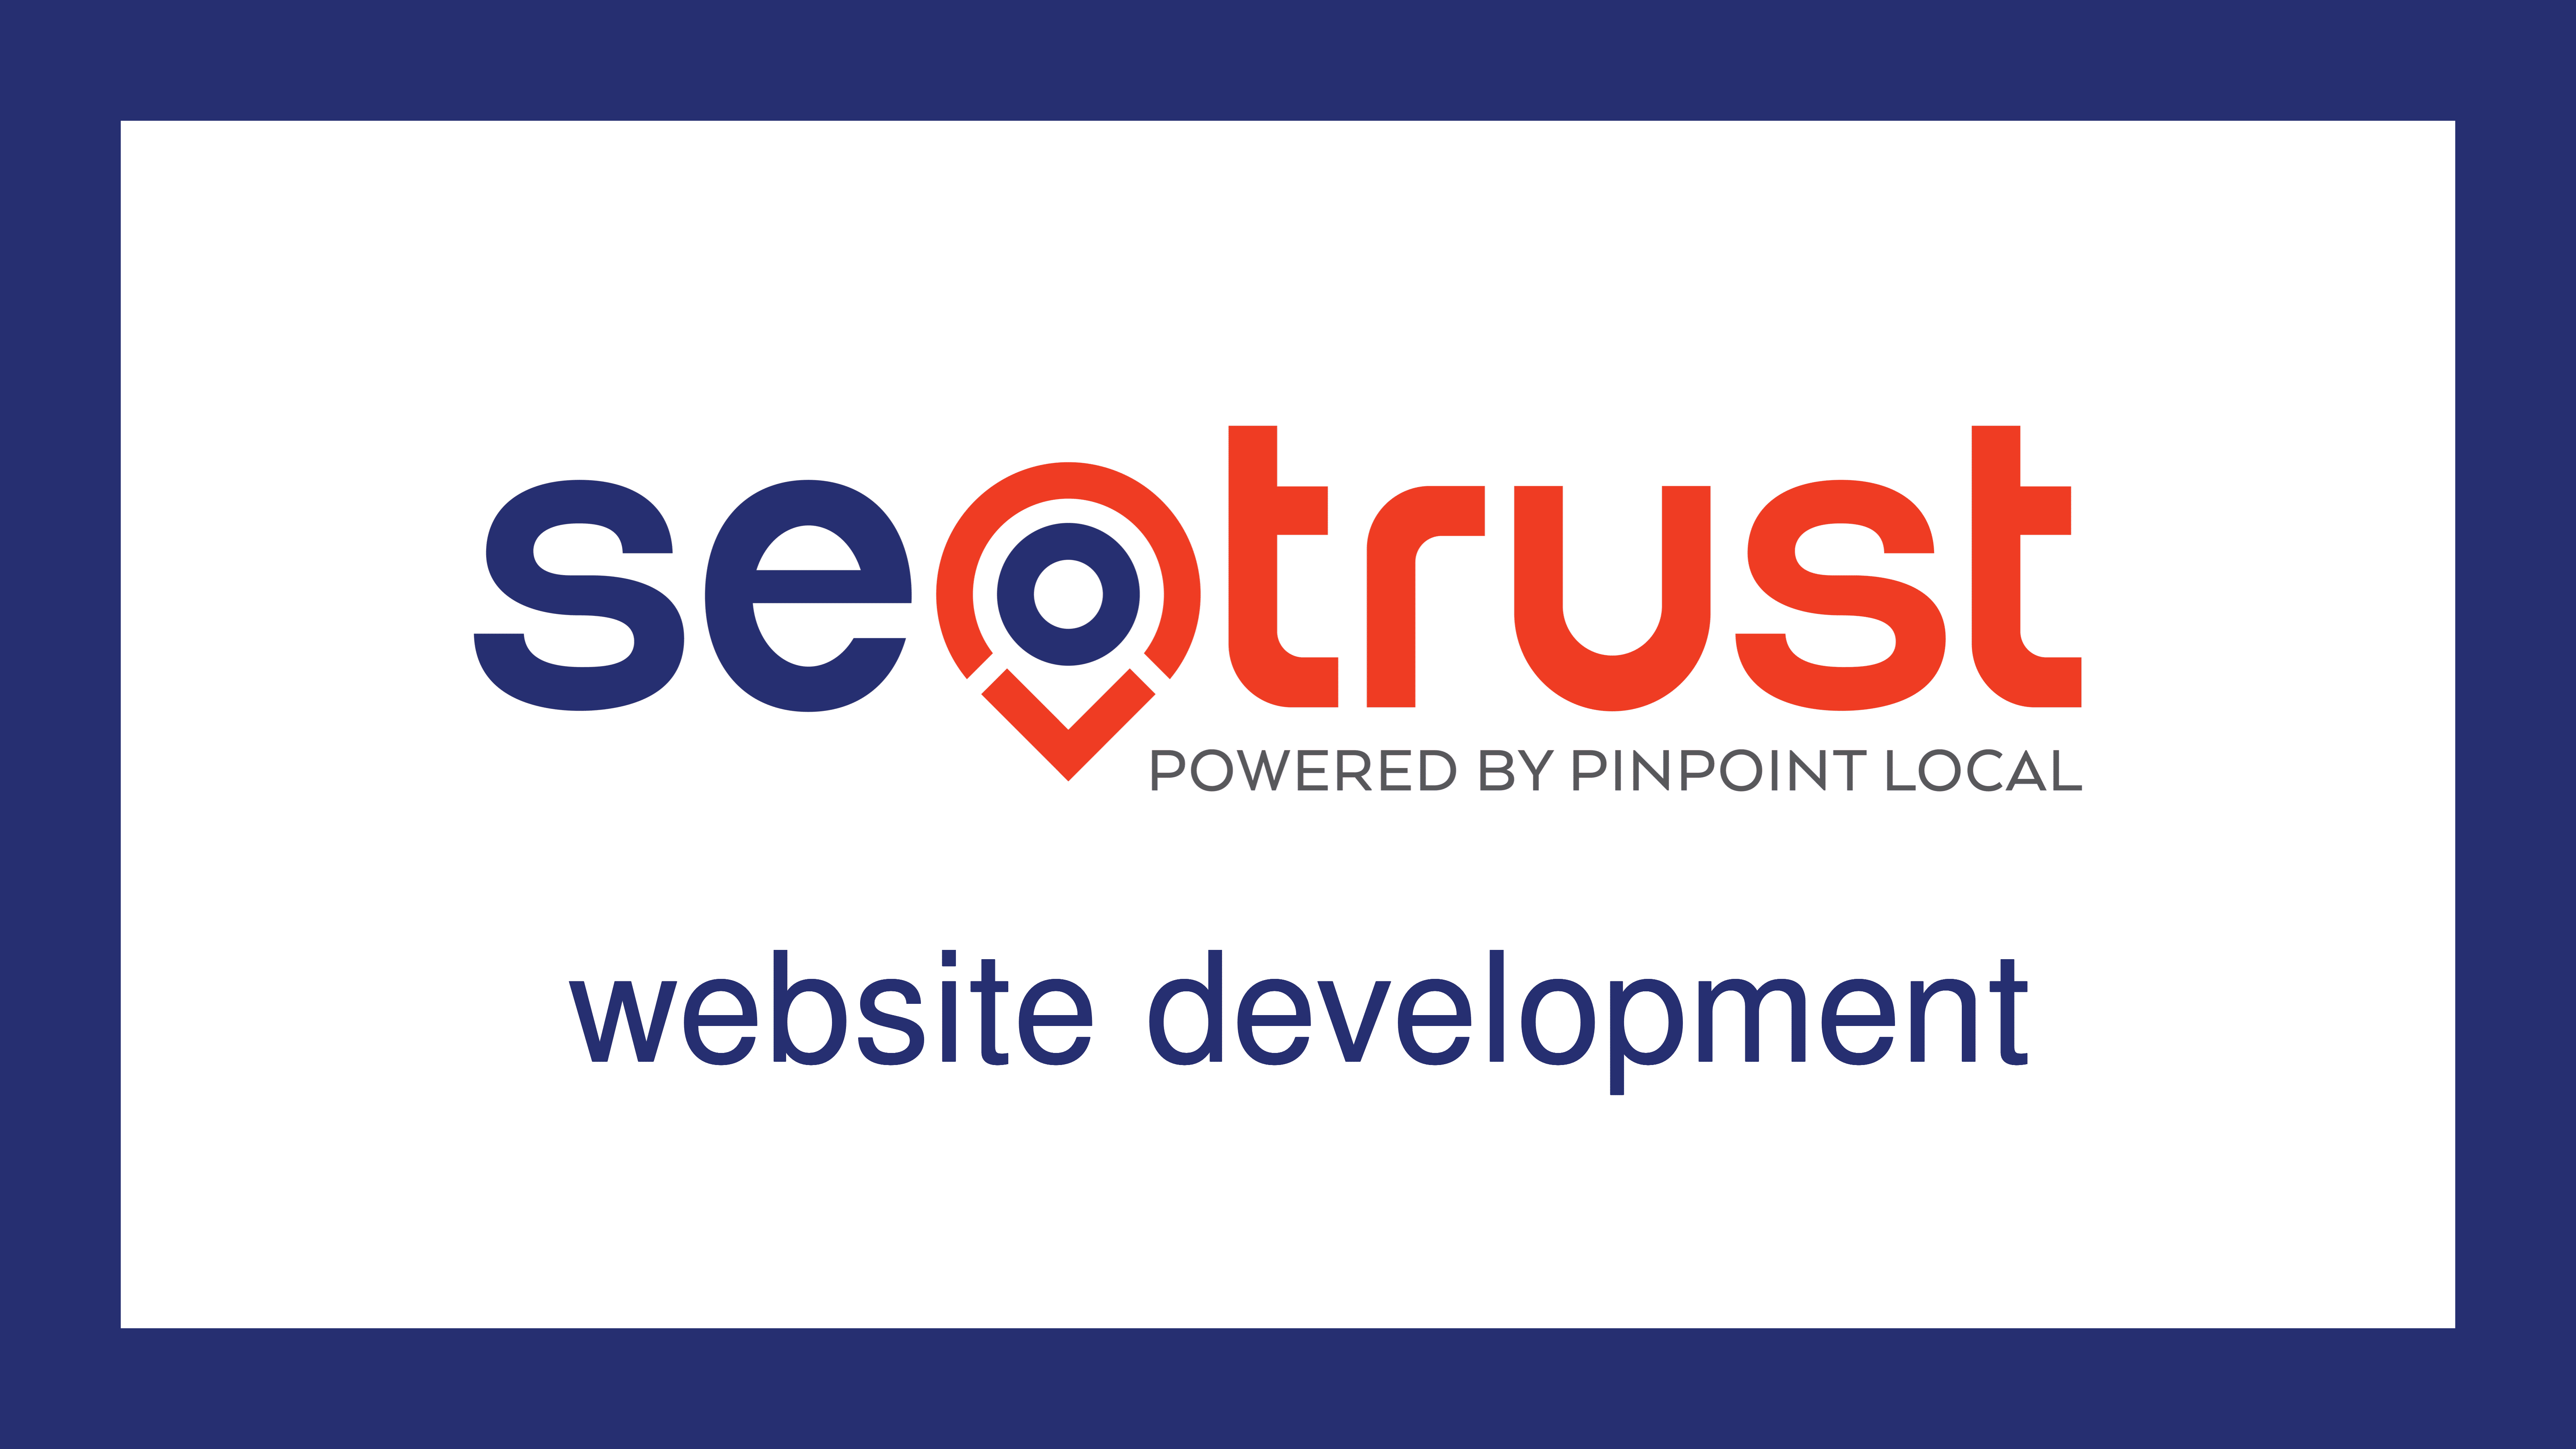 Looking for a local SEO expert in Pasadena who can provide top-notch SEO services? Look no further! Our team of experienced professionals specializes in expert website design and development.